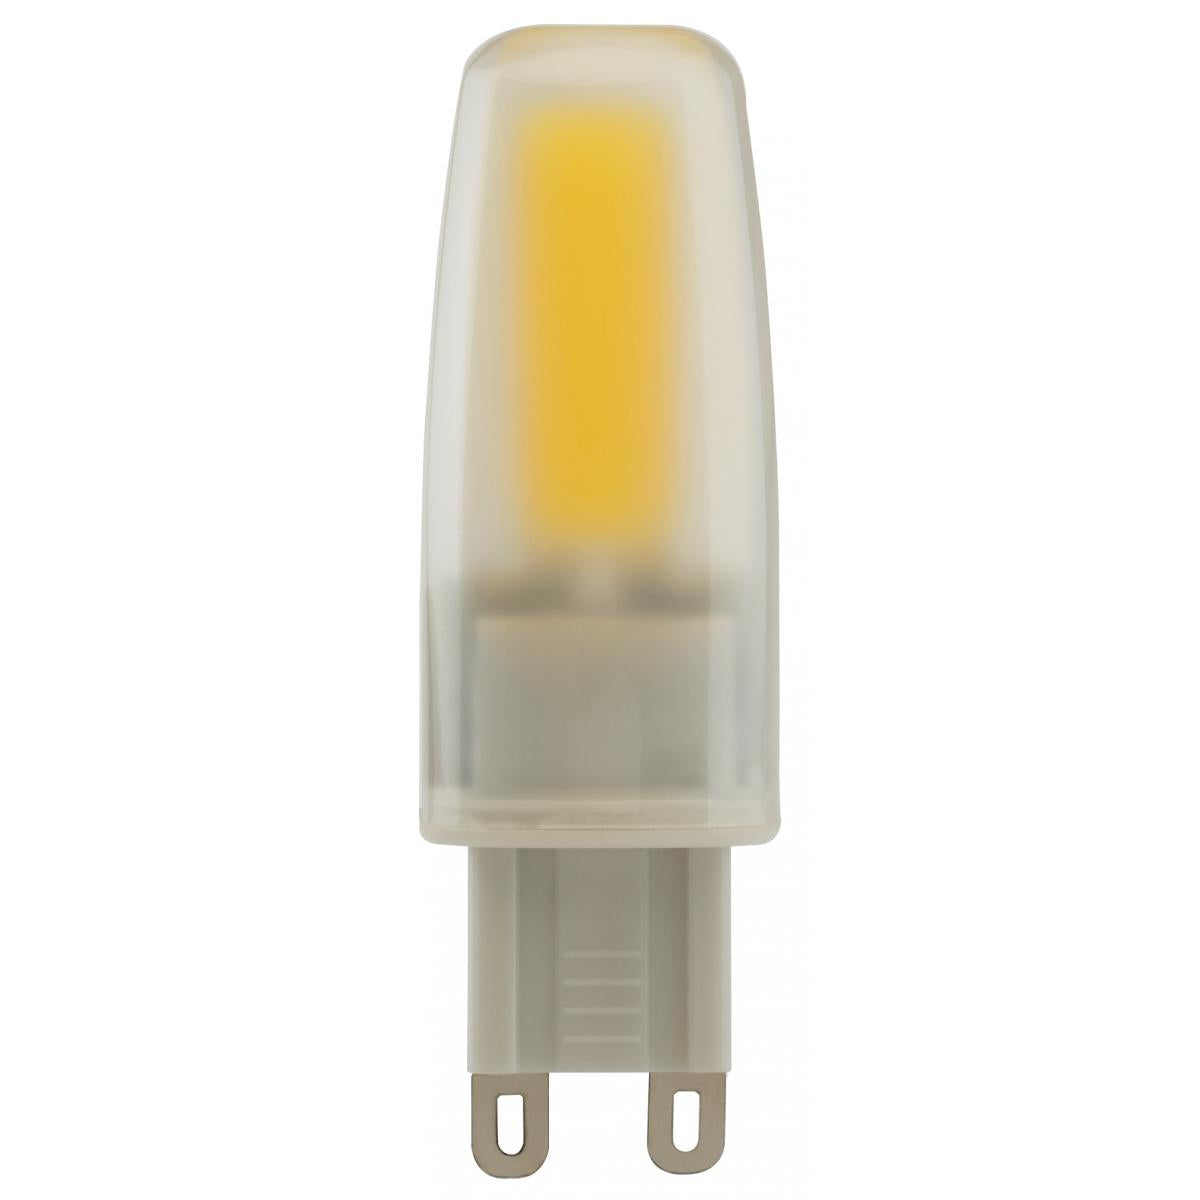 Replacement for Satco S8683 4 Watt JCD LED Frost 5000K G9 base 120 Volt